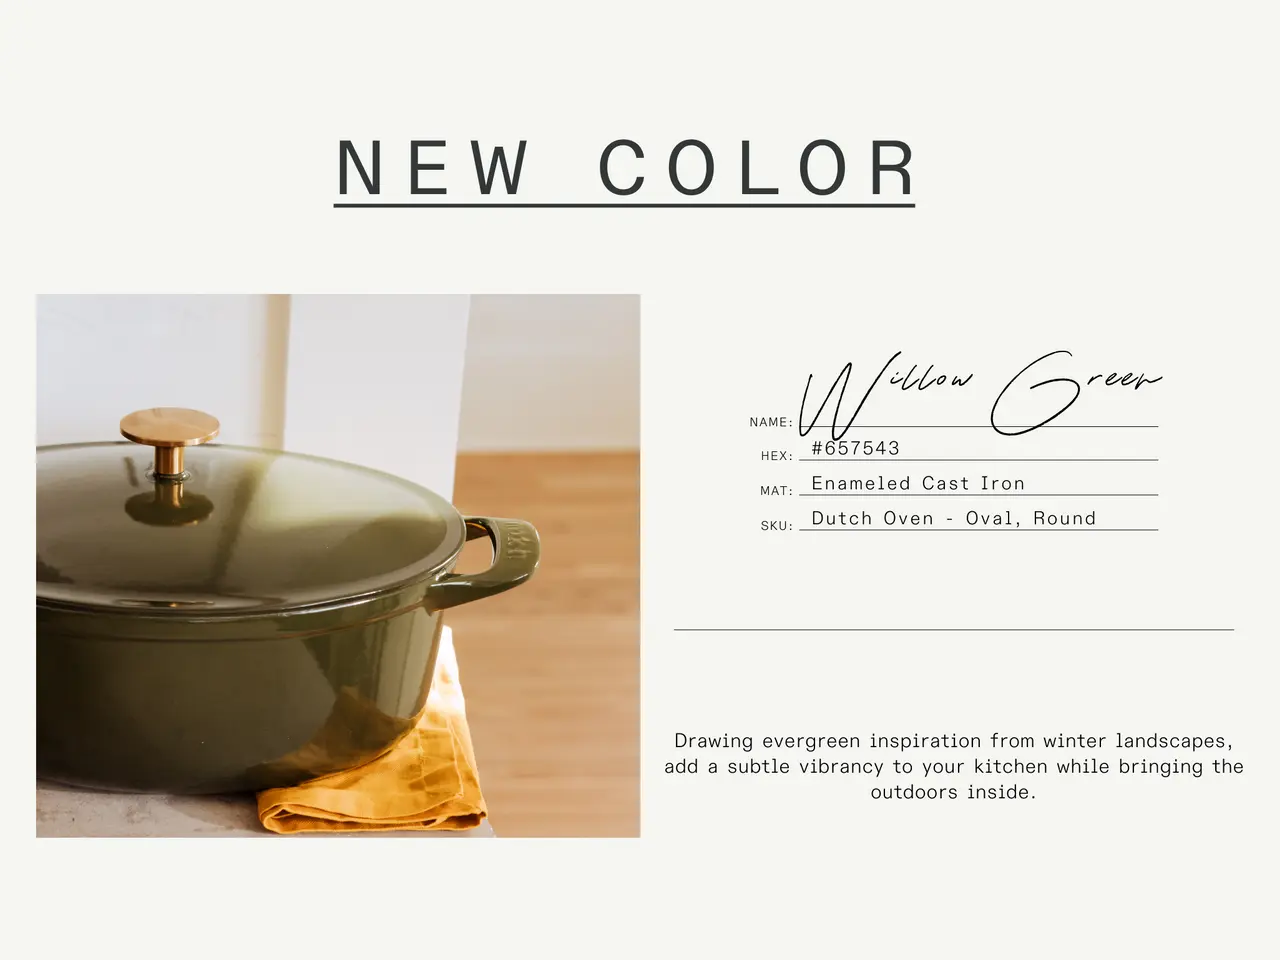 A promotional image featuring a new color for an enamel cast iron Dutch oven, displayed next to text describing the product with a swatch of the color and a description that it's inspired by winter landscapes.